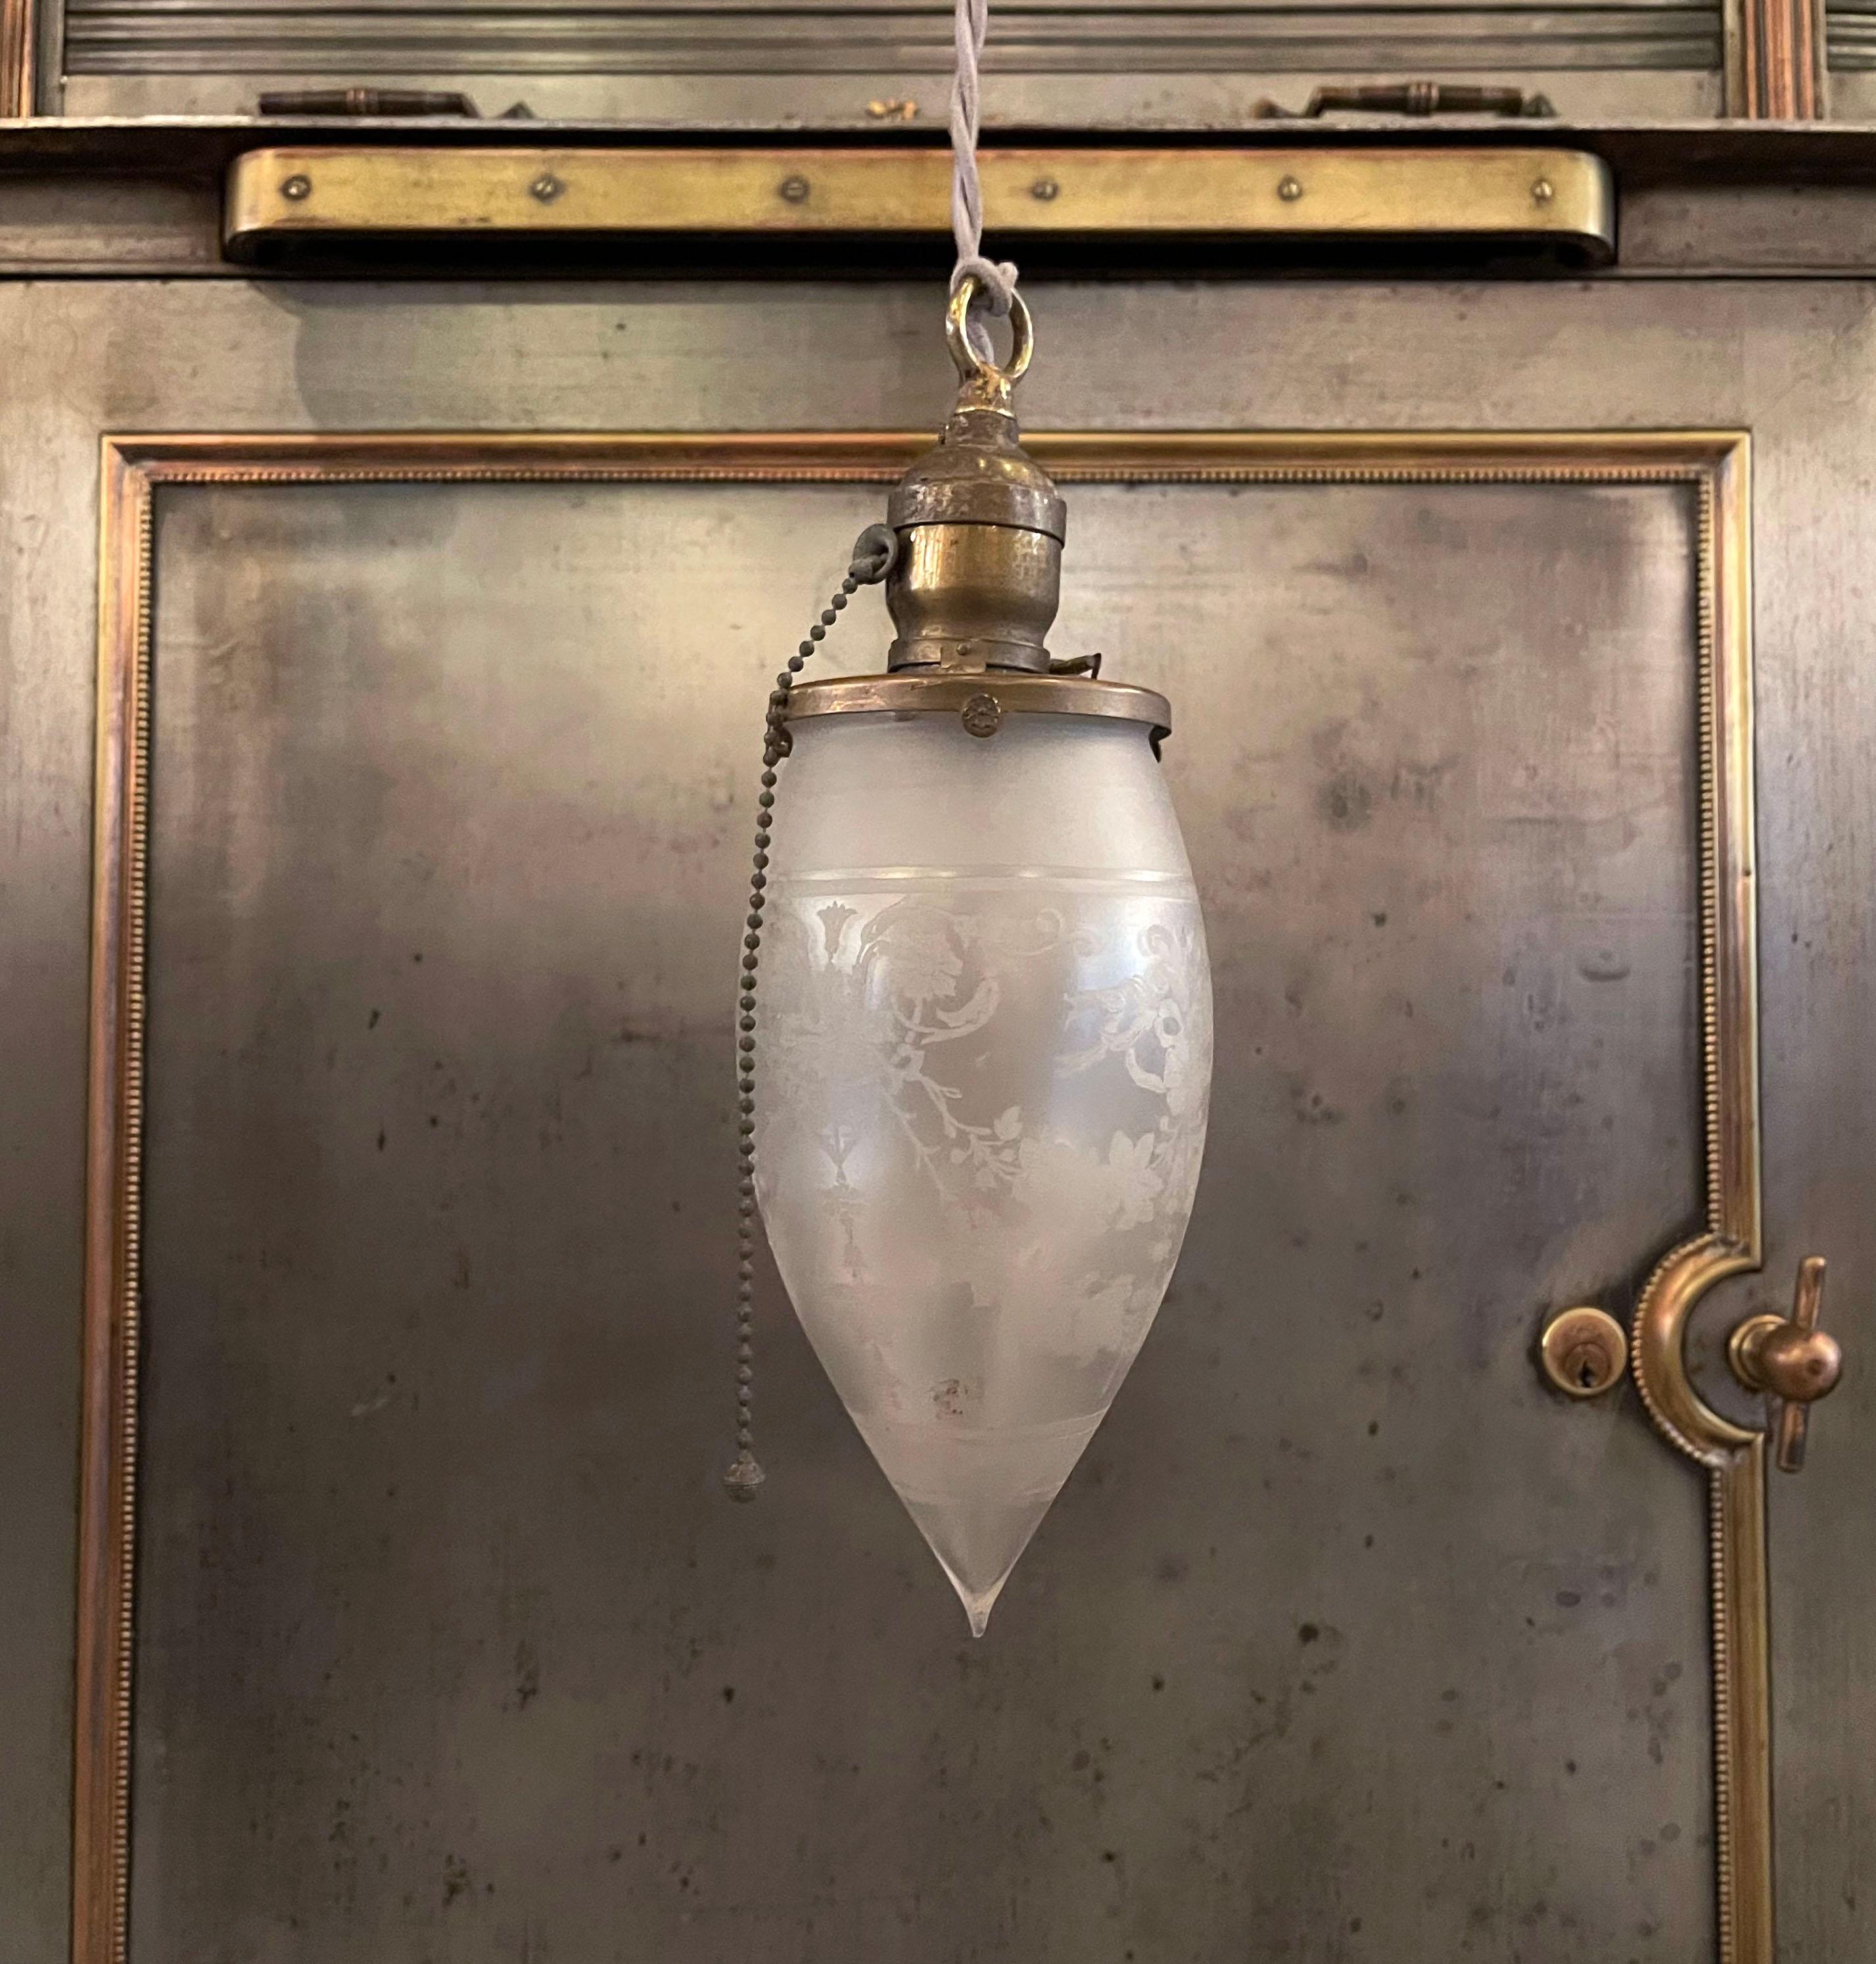 Antique, late 19th century, industrial pendant light with frosted glass, teardrop shade and brass pull chain fitter is newly wired with beige braided cloth cord to hang at an overall height of 83.5 inches.